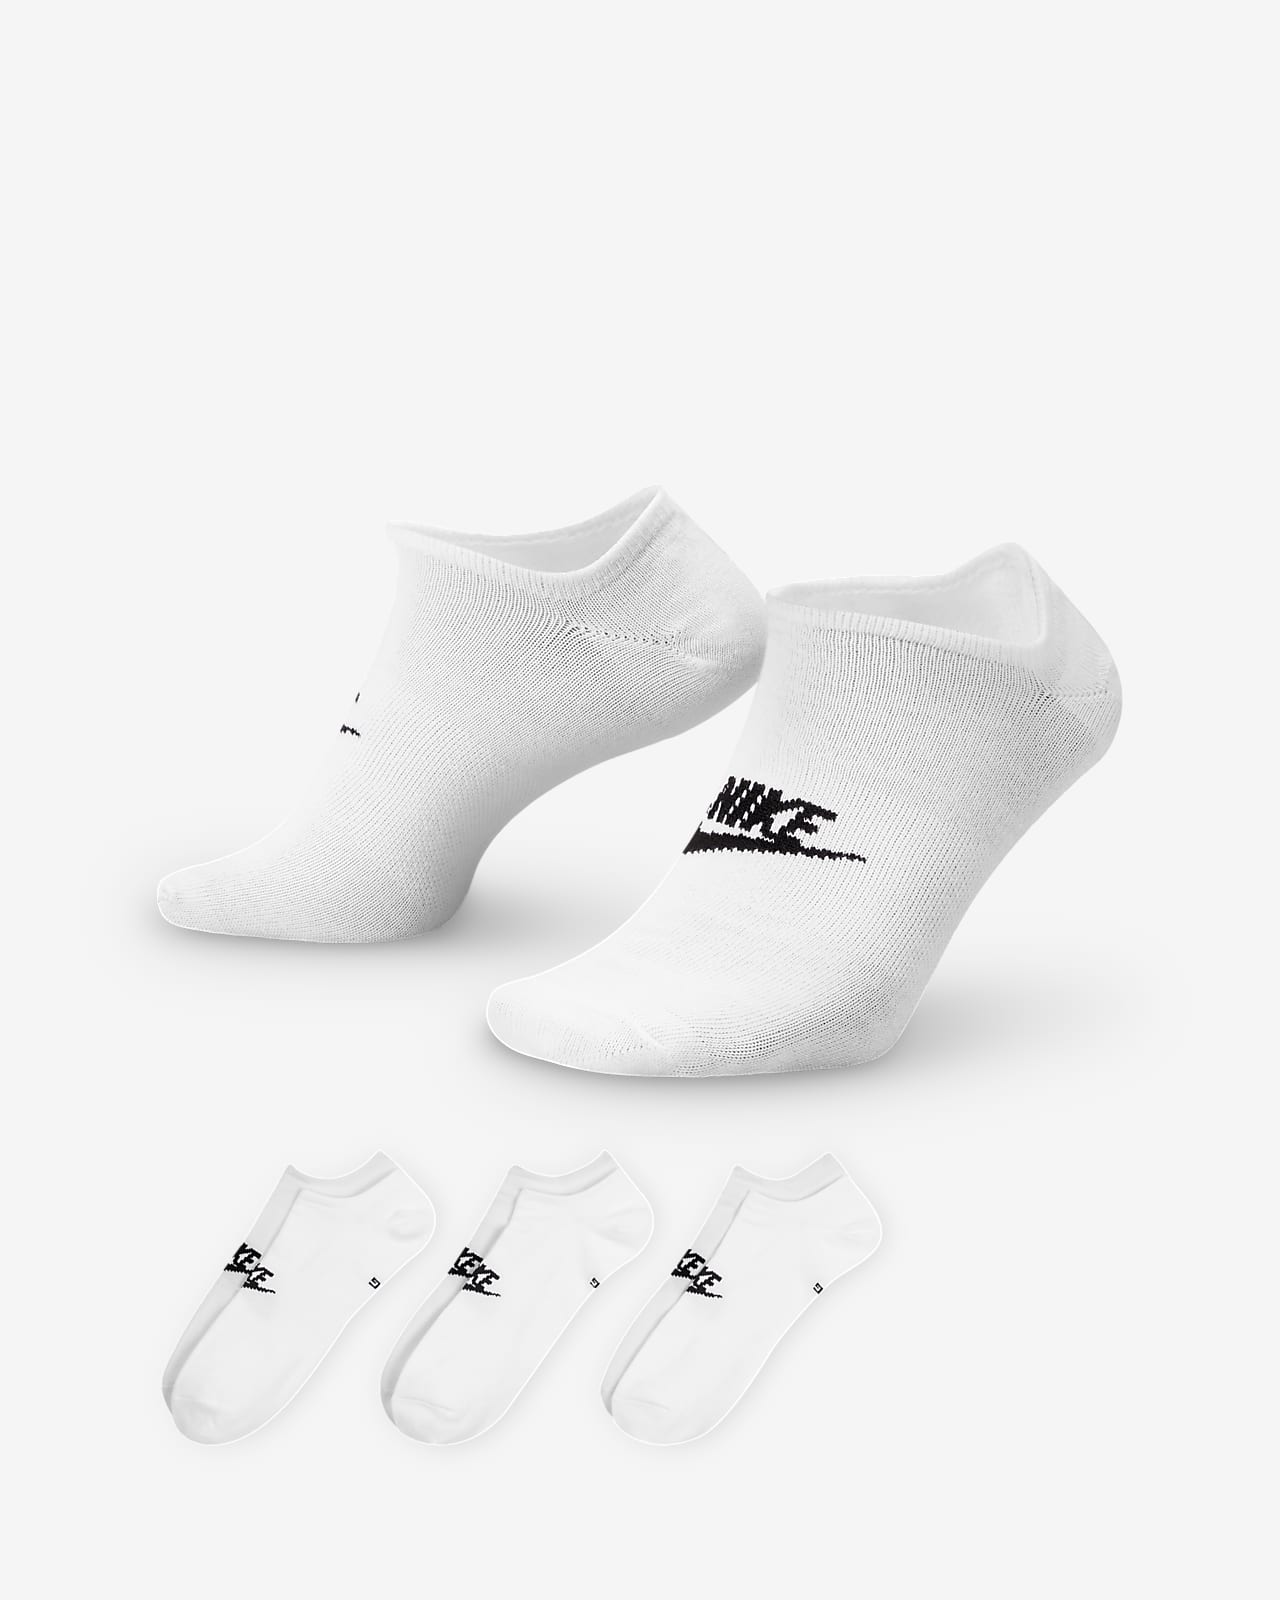 Chaussettes invisibles Nike Sportswear Everyday Essential (3 paires)